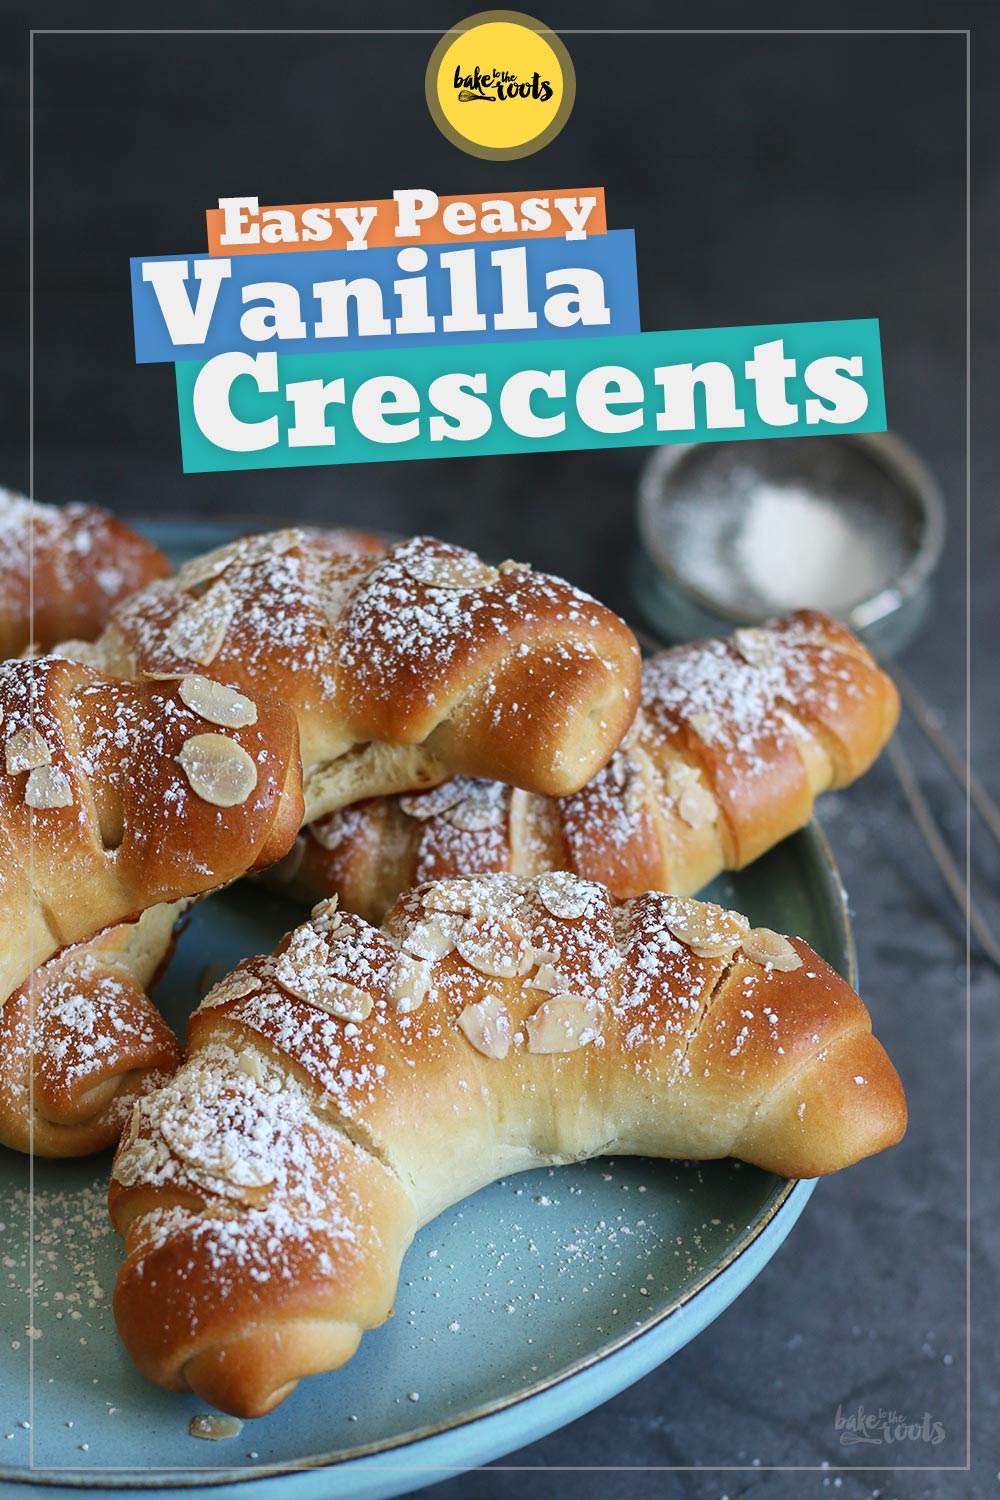 Easy Peasy Vanilla Crescents | Bake to the roots